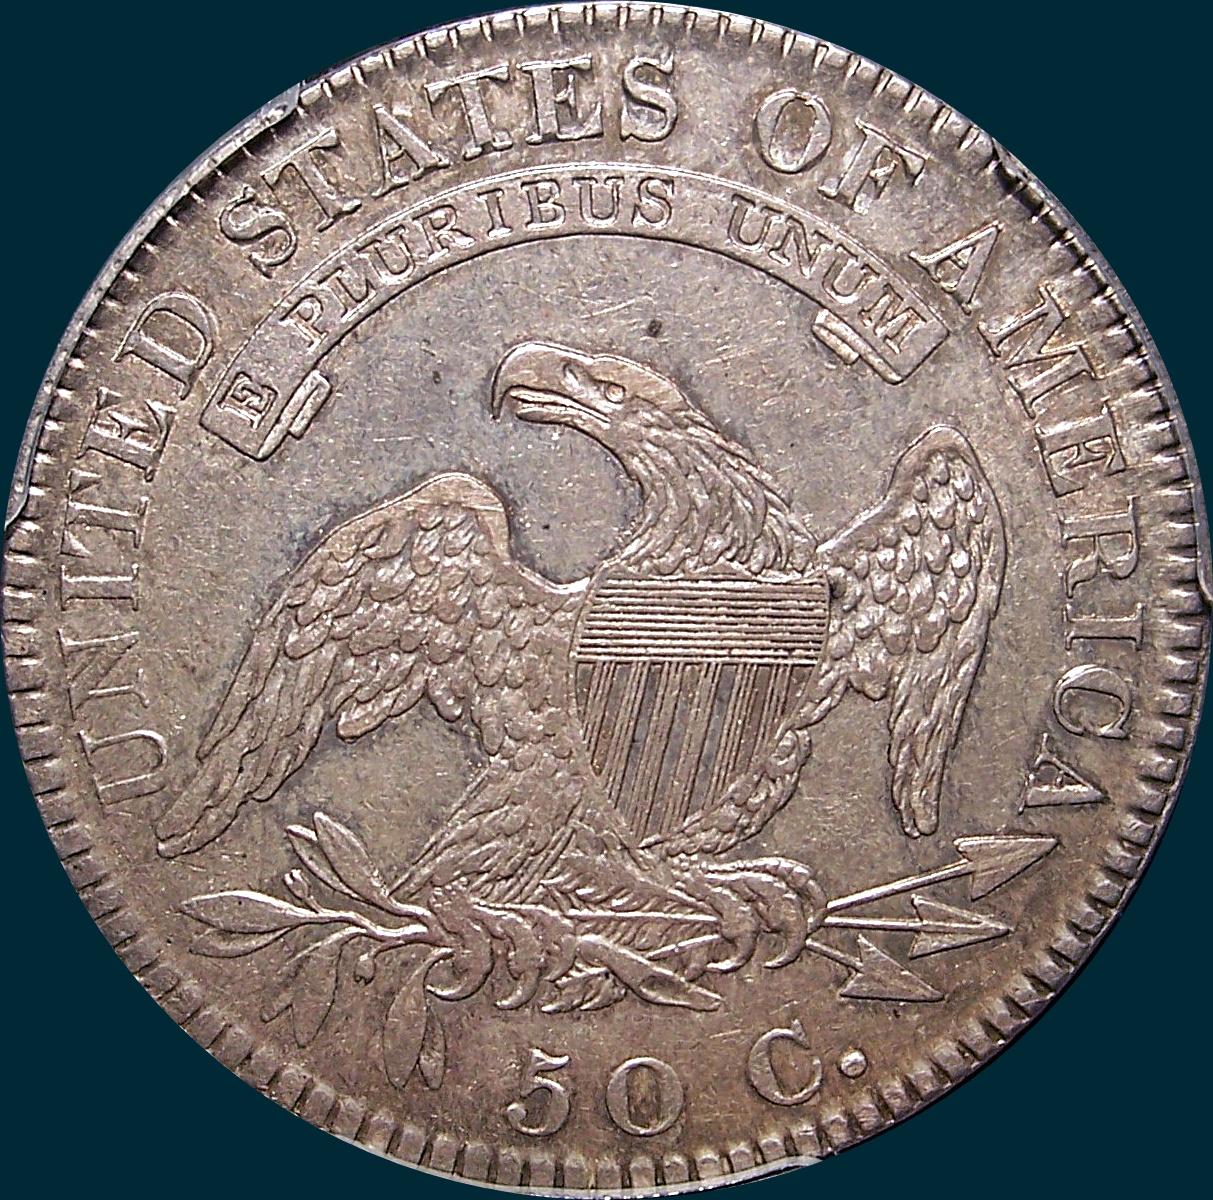 1820, O-102, 20 over 19, Curl Base 2, Capped Bust, Half Dollar